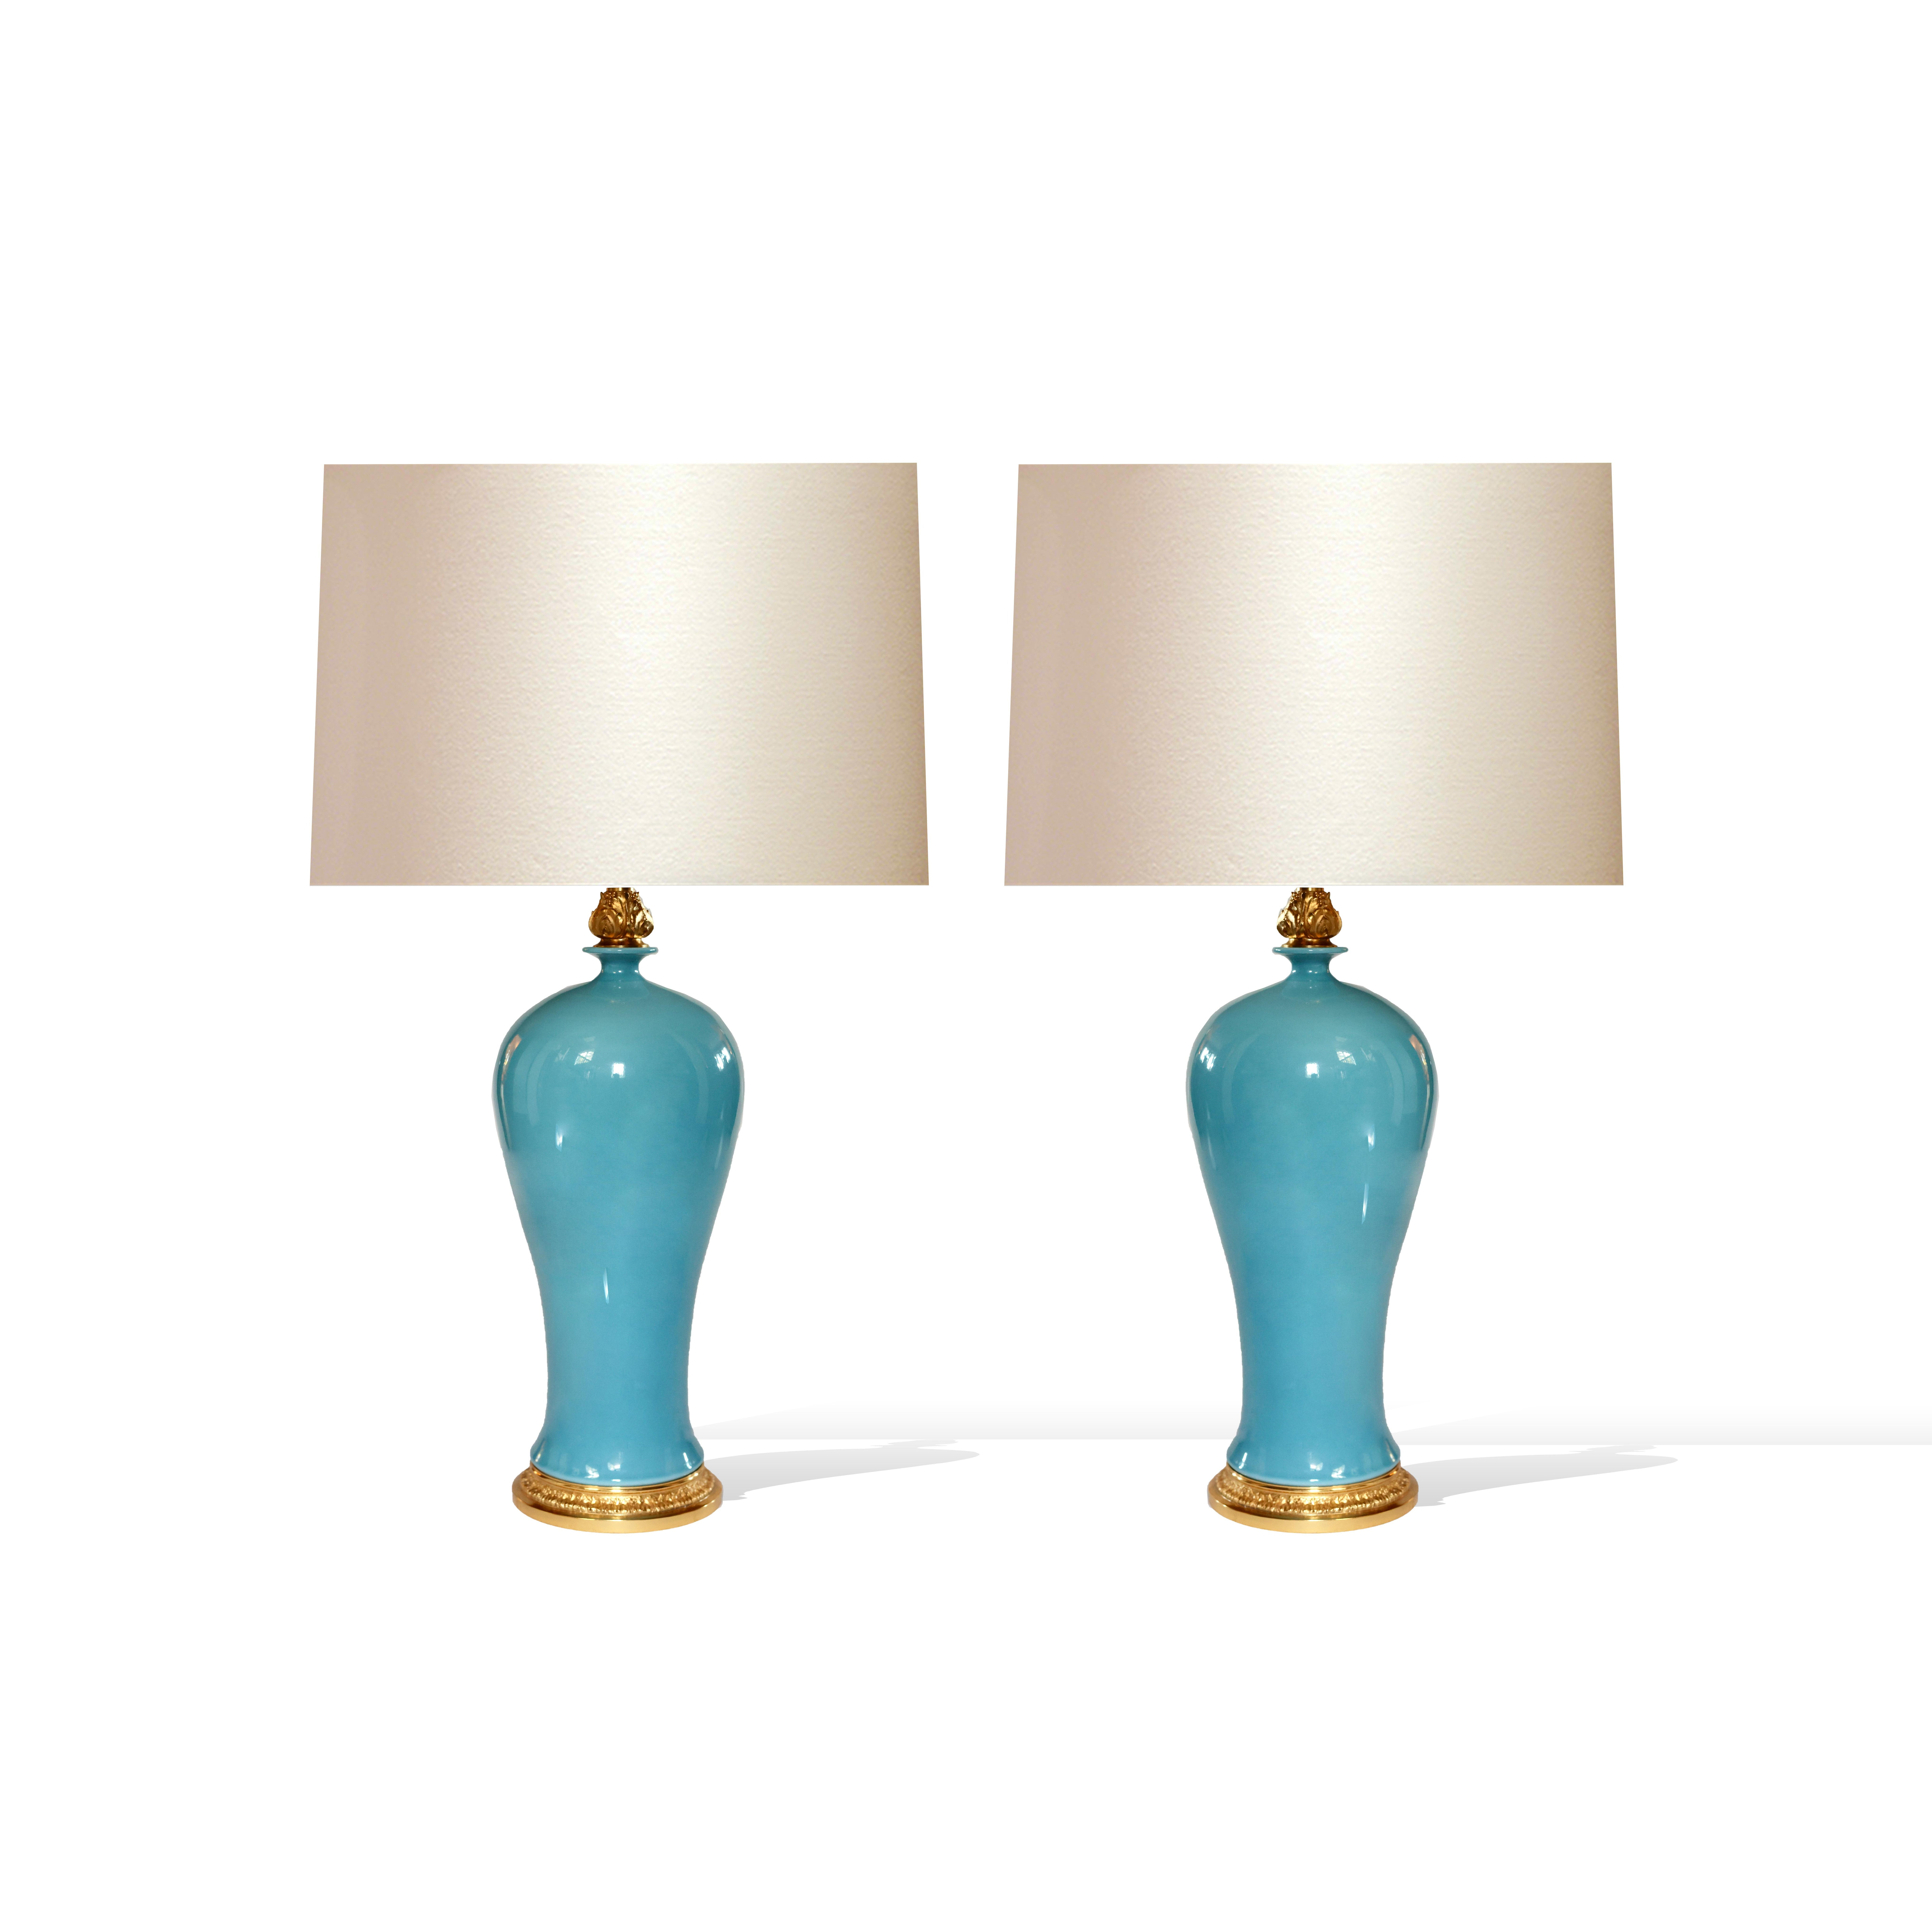 Blue glazed porcelain lamps with gilt brass bases and decorations 
Each lamp installed two E26 sockets.120W total 
Lampshade are not include.
To the top of the porcelain 16”.